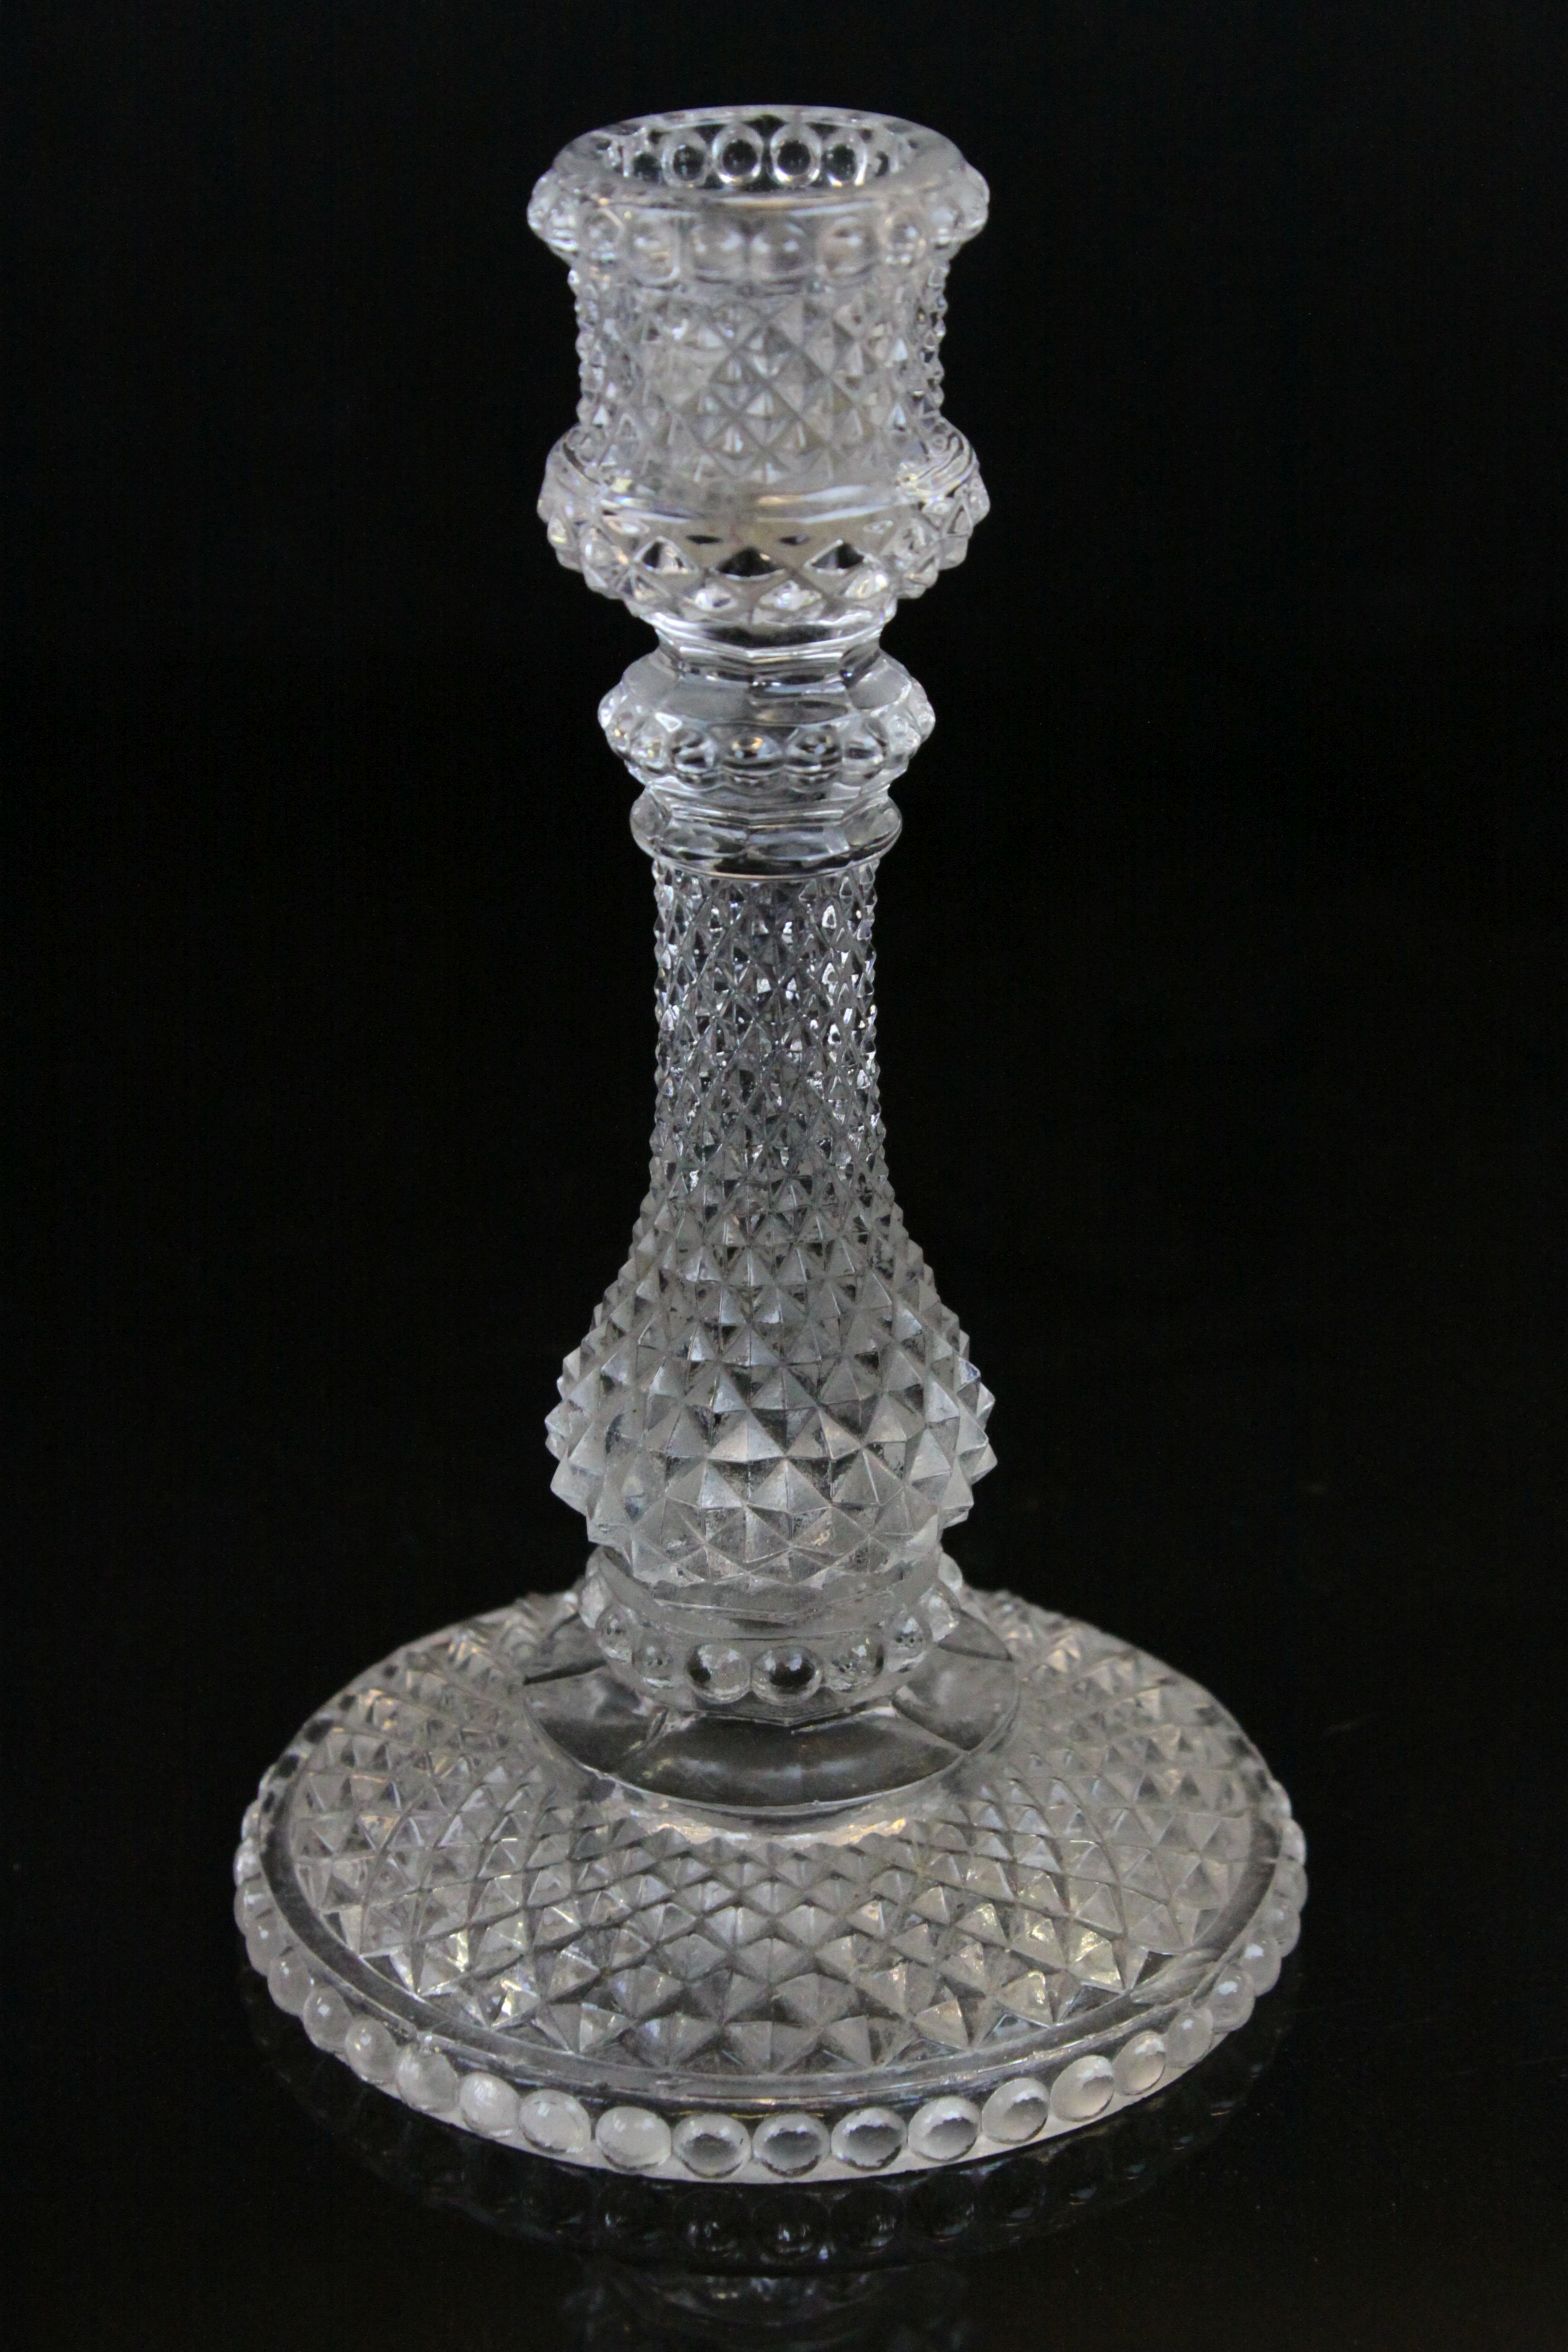 Pair of Baccarat Hobnail Glass Candlesticks, 18cms high - Image 3 of 6